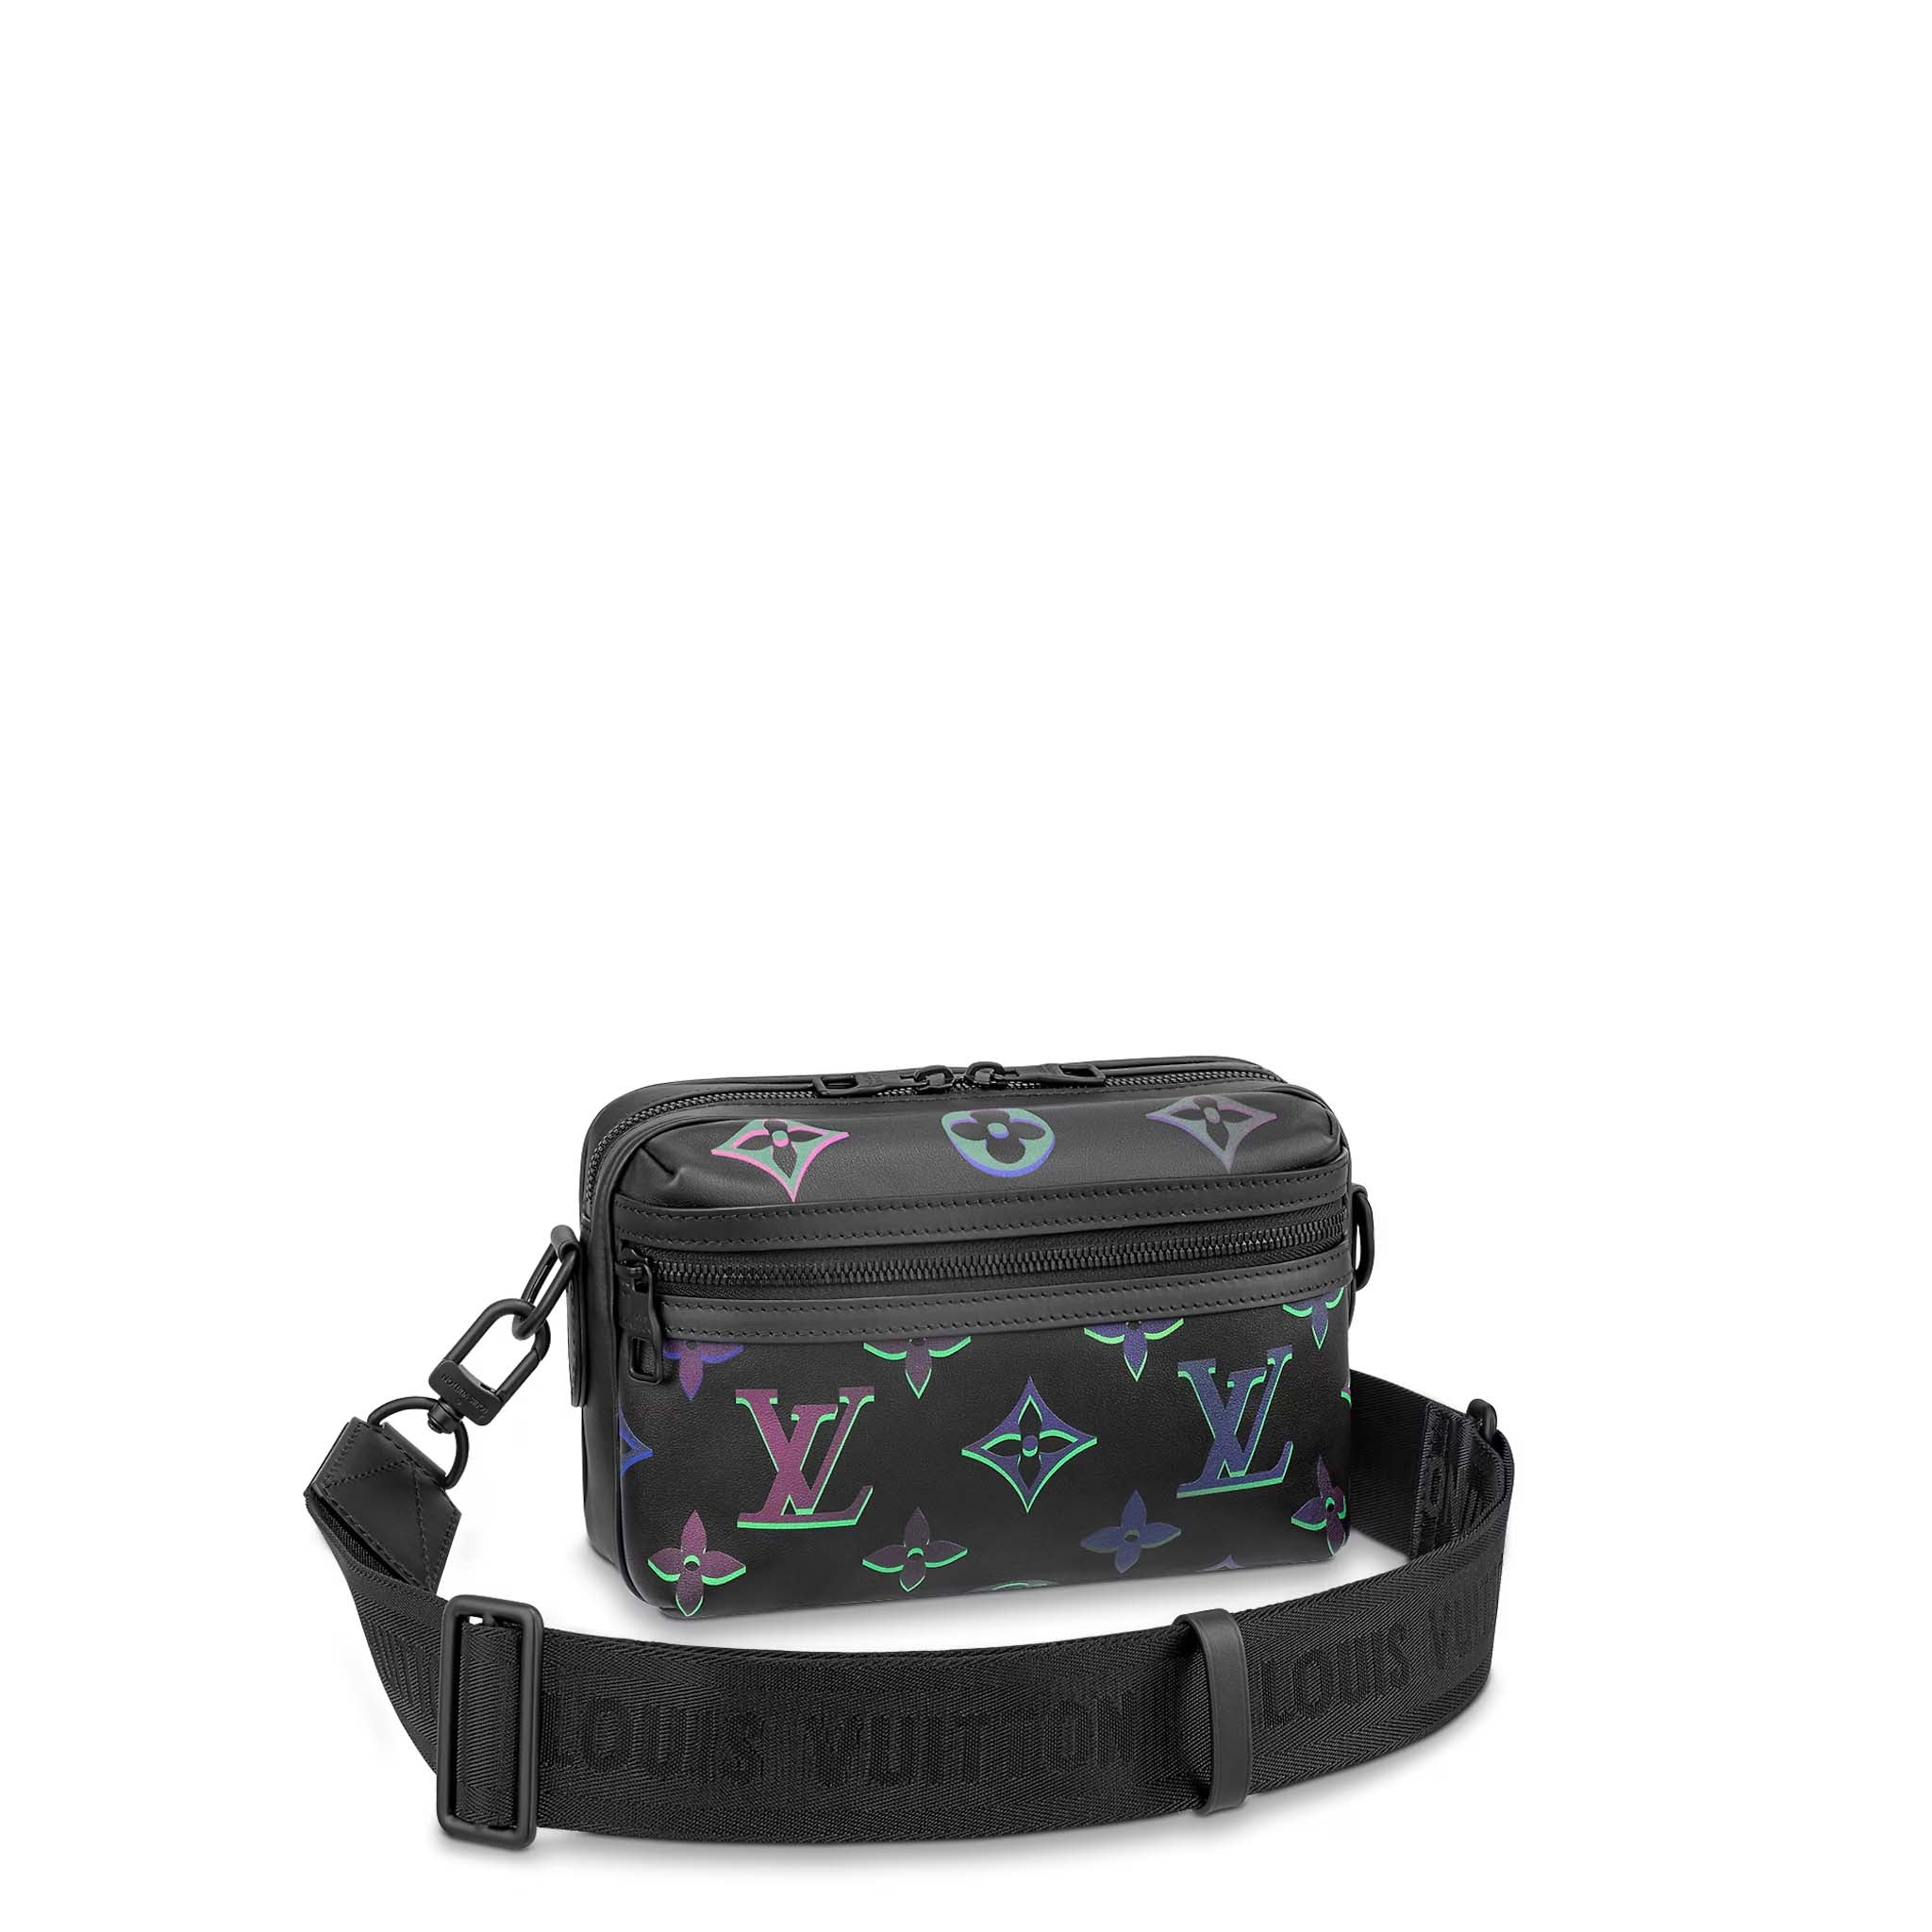 Louis Vuitton Backpack Comet Black Borealis in Calfskin Leather